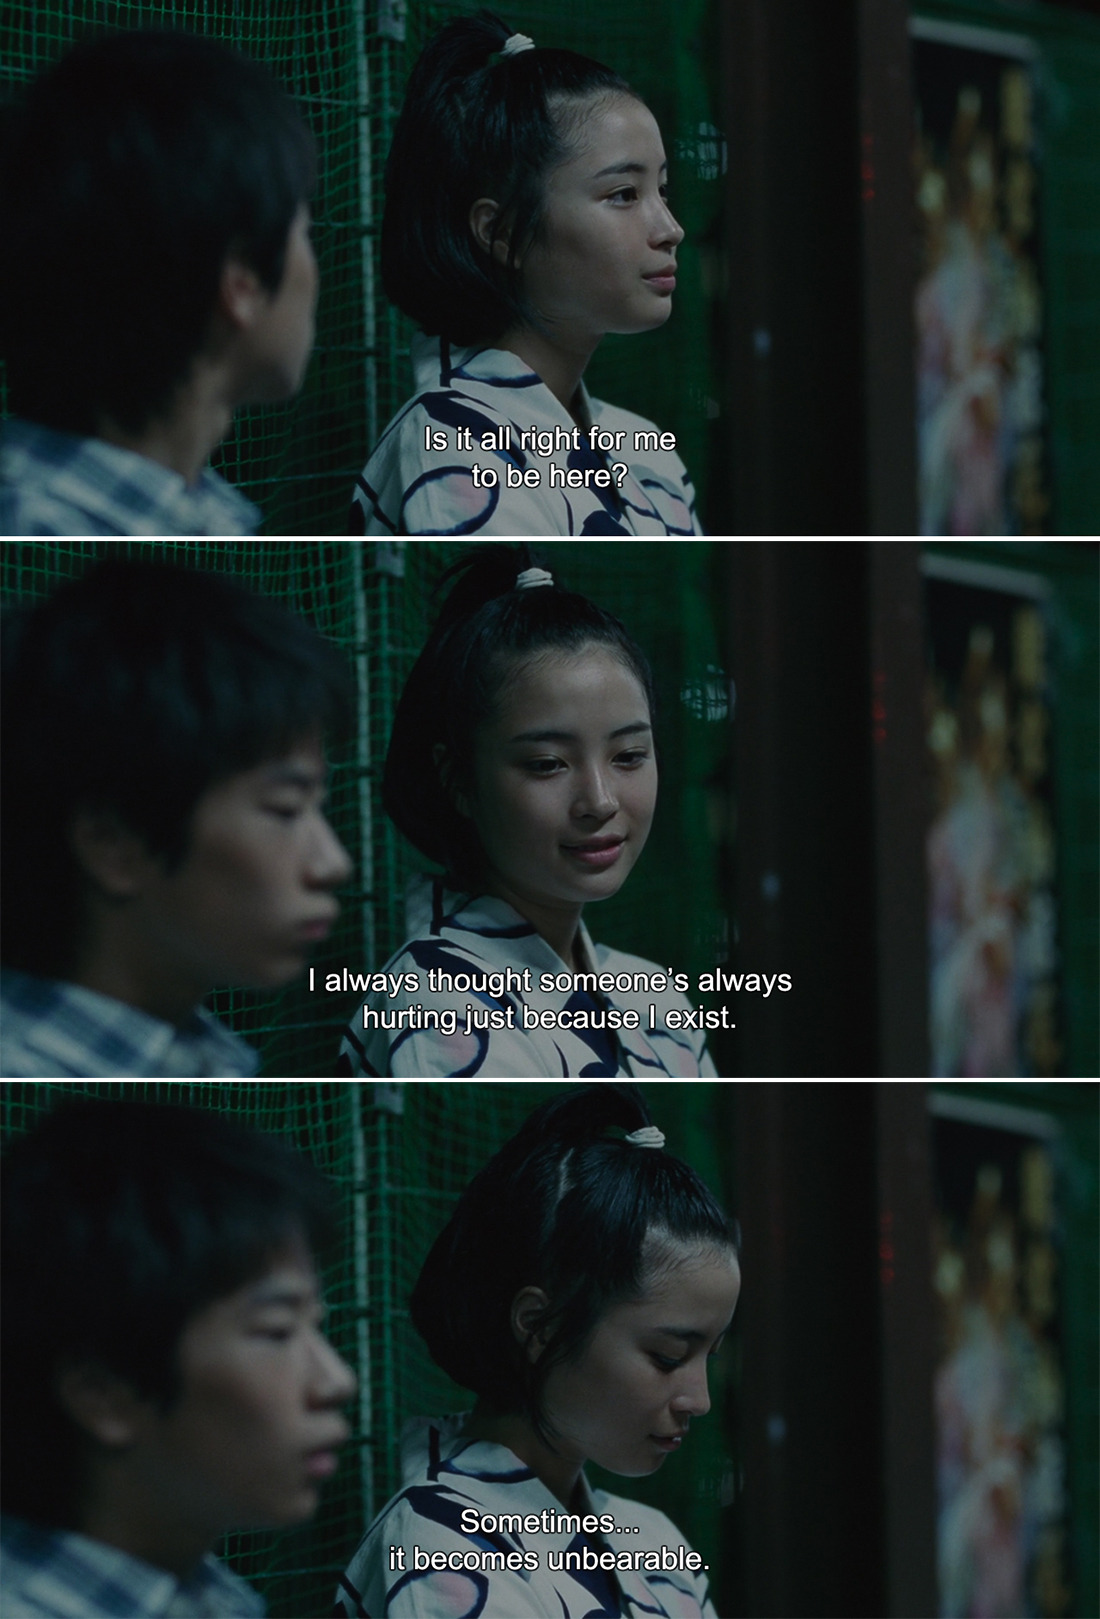 ― Our Little Sister (2015)
Suzu: Is it all right for me to be here? I always thought someone’s always hurting just because I exist. Sometimes…it becomes unbearable.